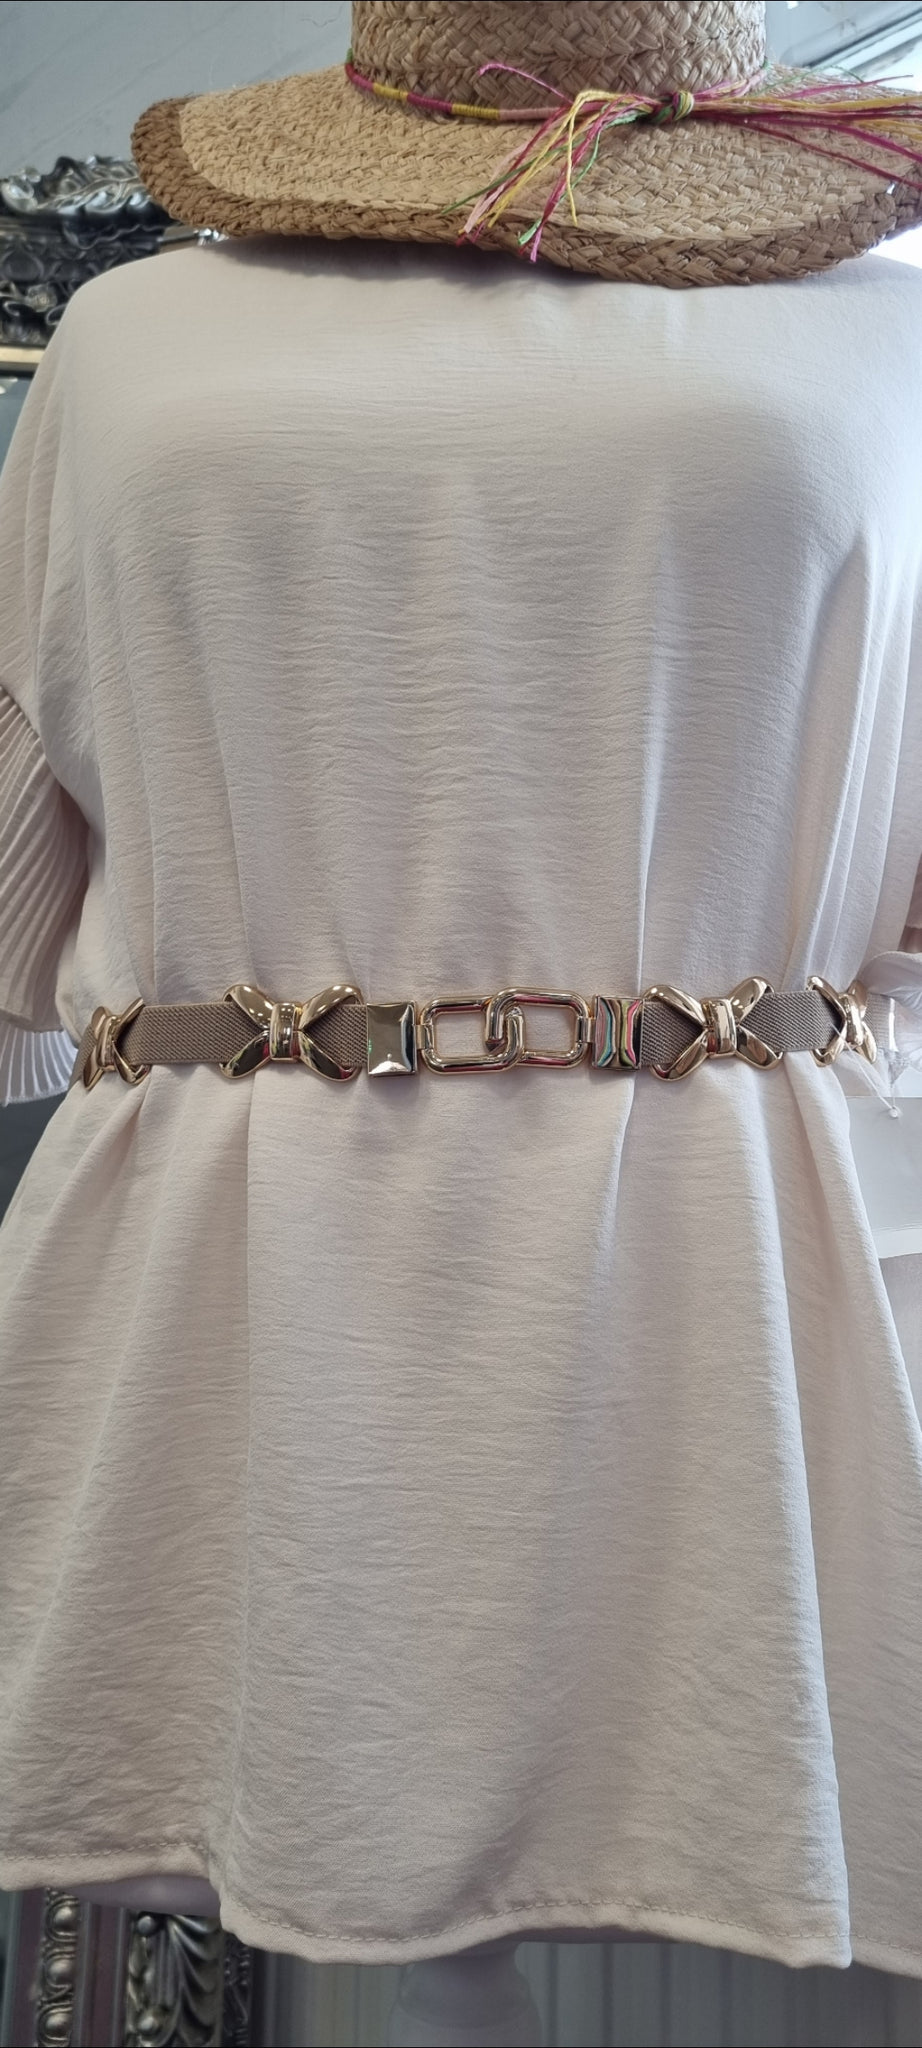 Kiss Kiss Stretchy Belt - Nude & Gold